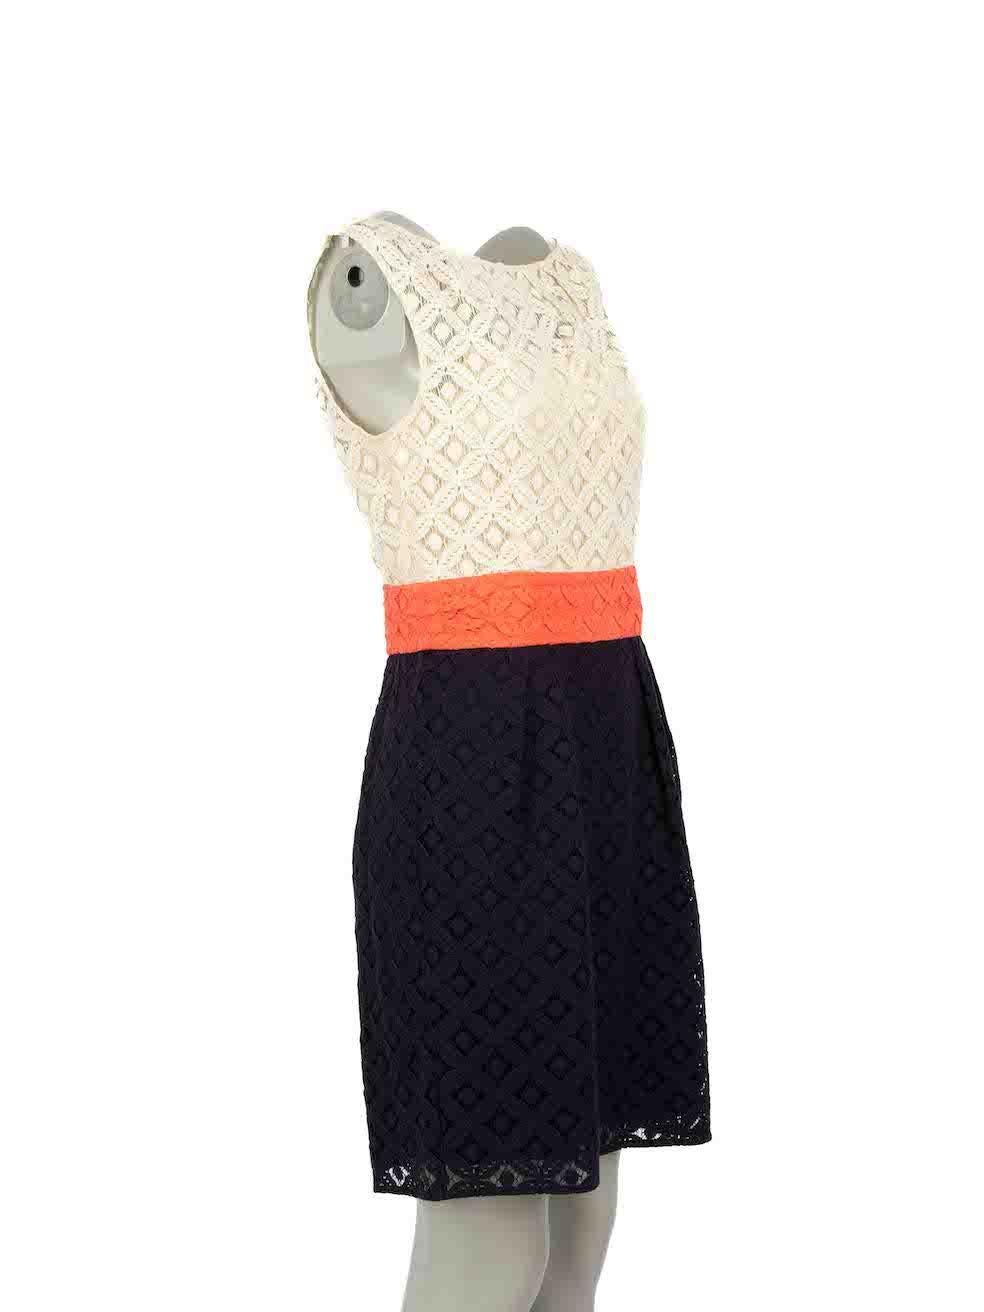 CONDITION is Very good. Minimal wear to dress is evident. Minimal wear to the underarms with slight discolouration on this used Milly designer resale item.
 
Details
Multicolour
Cotton lace
Dress
Sleeveless
Round neck
Mini
Back zip and hook